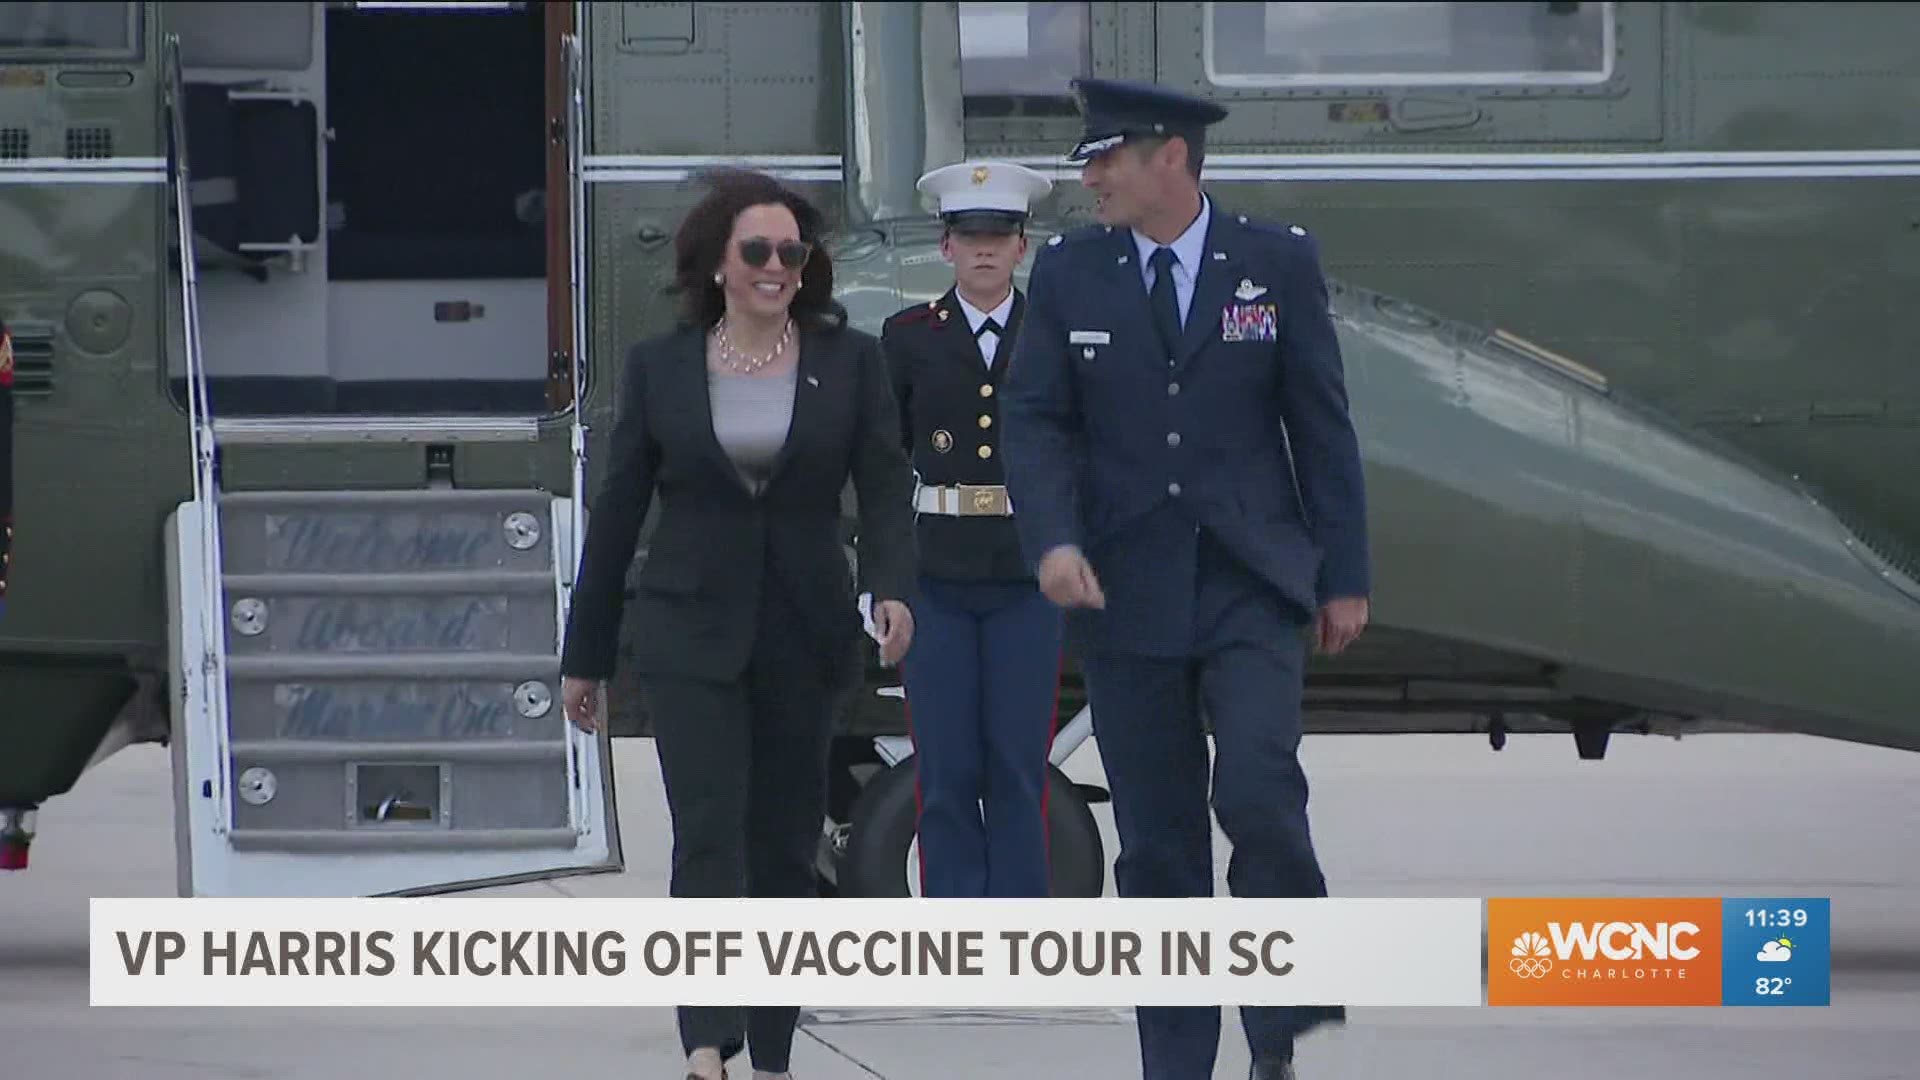 Vice President Kamala Harris is visiting SC this week to kick off her vaccine tour.